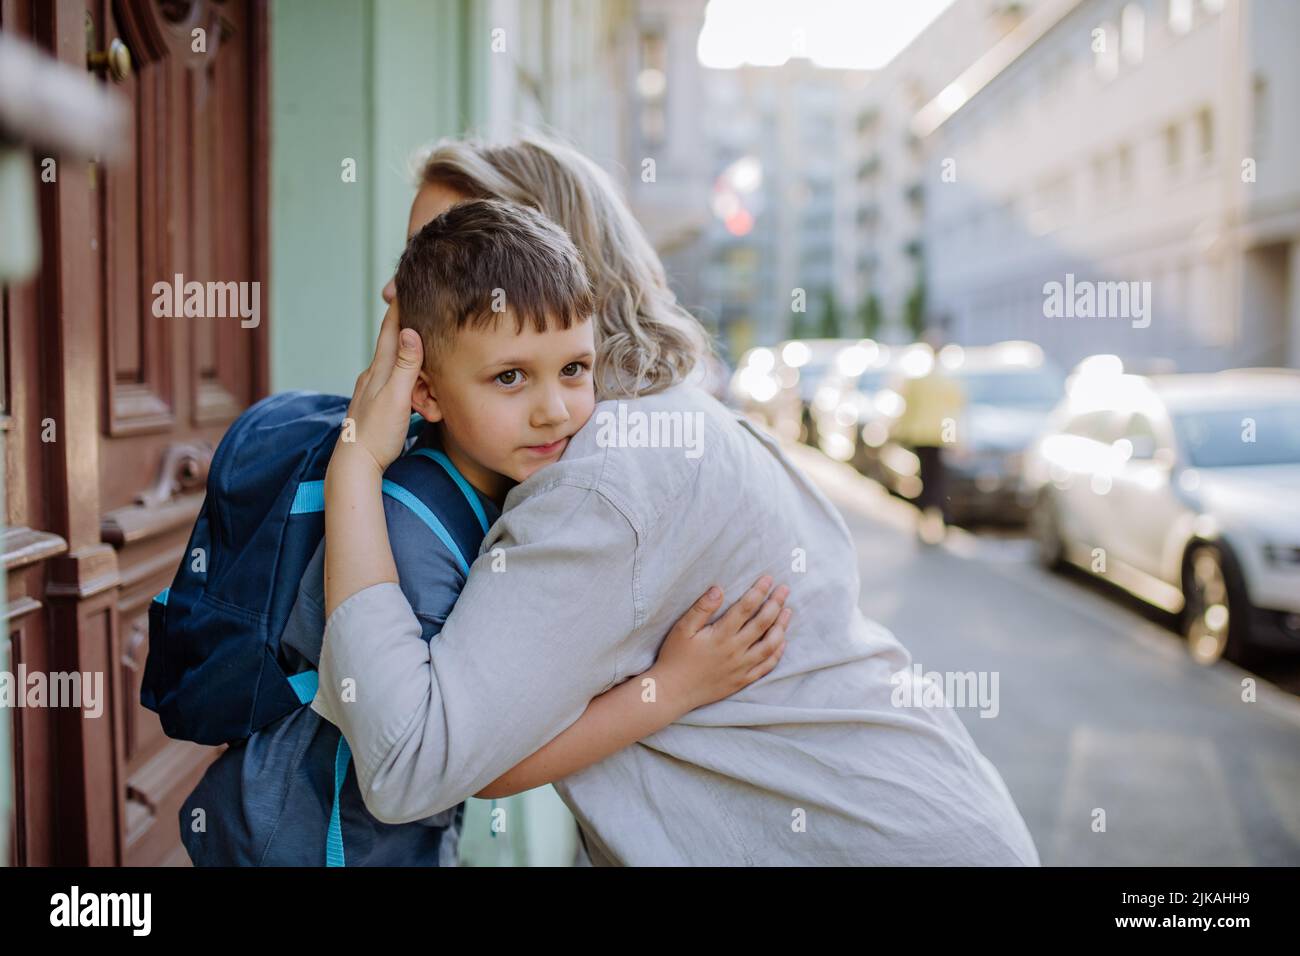 Mother hugs her young son on the way to school, and a mother and boy say goodbye before school. Stock Photo